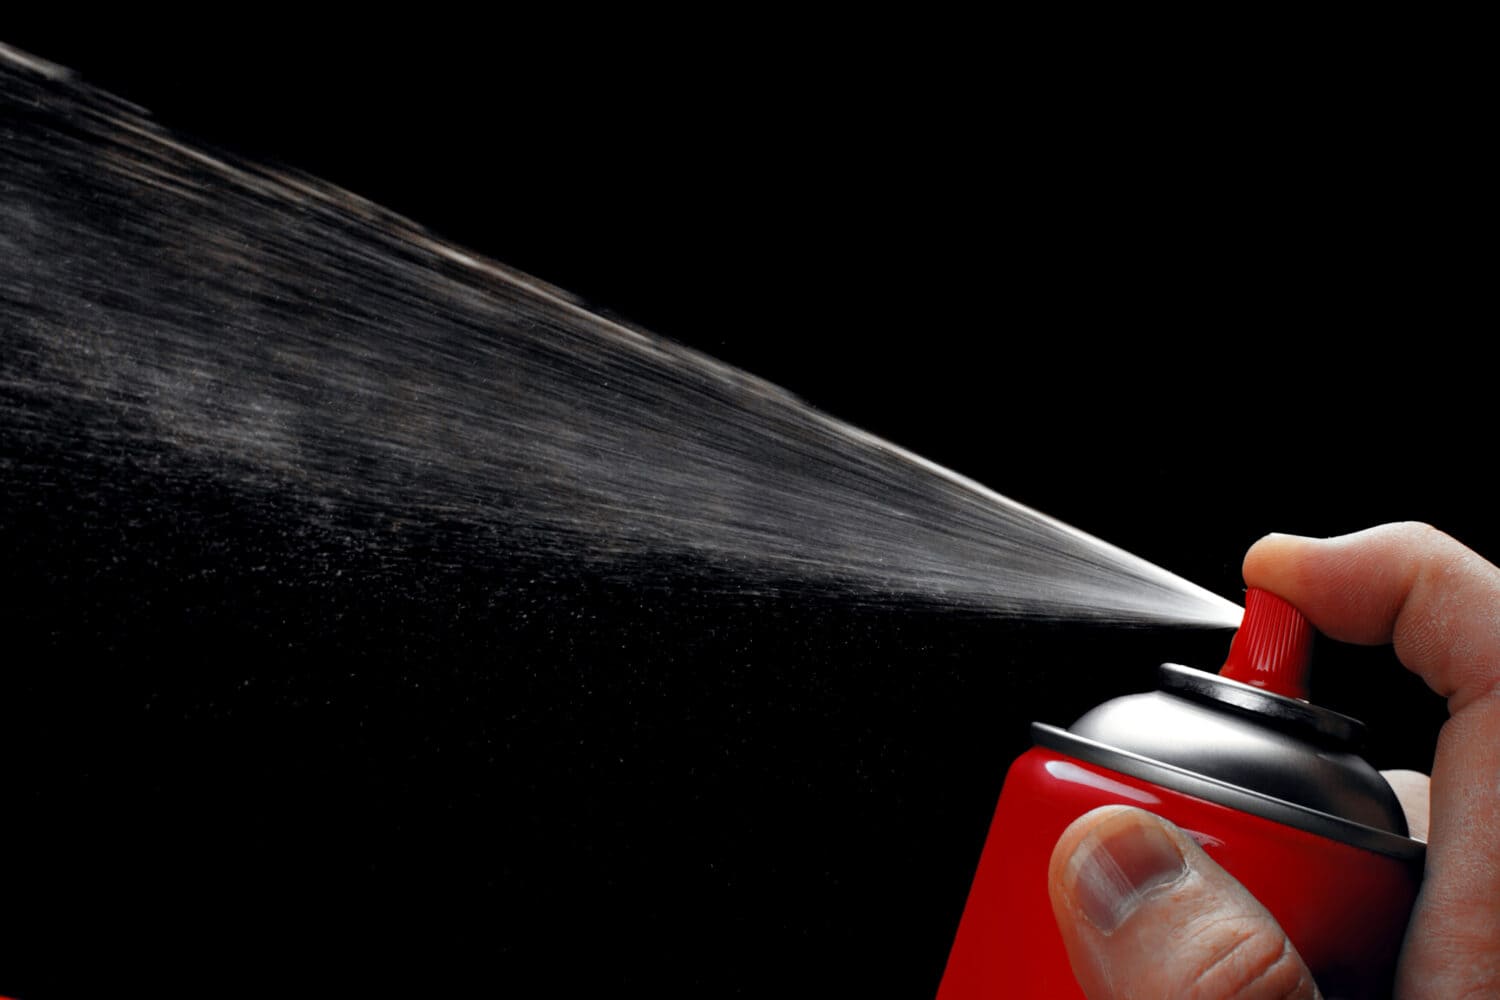 Close-up of red aerosol can showing off the spray against black background